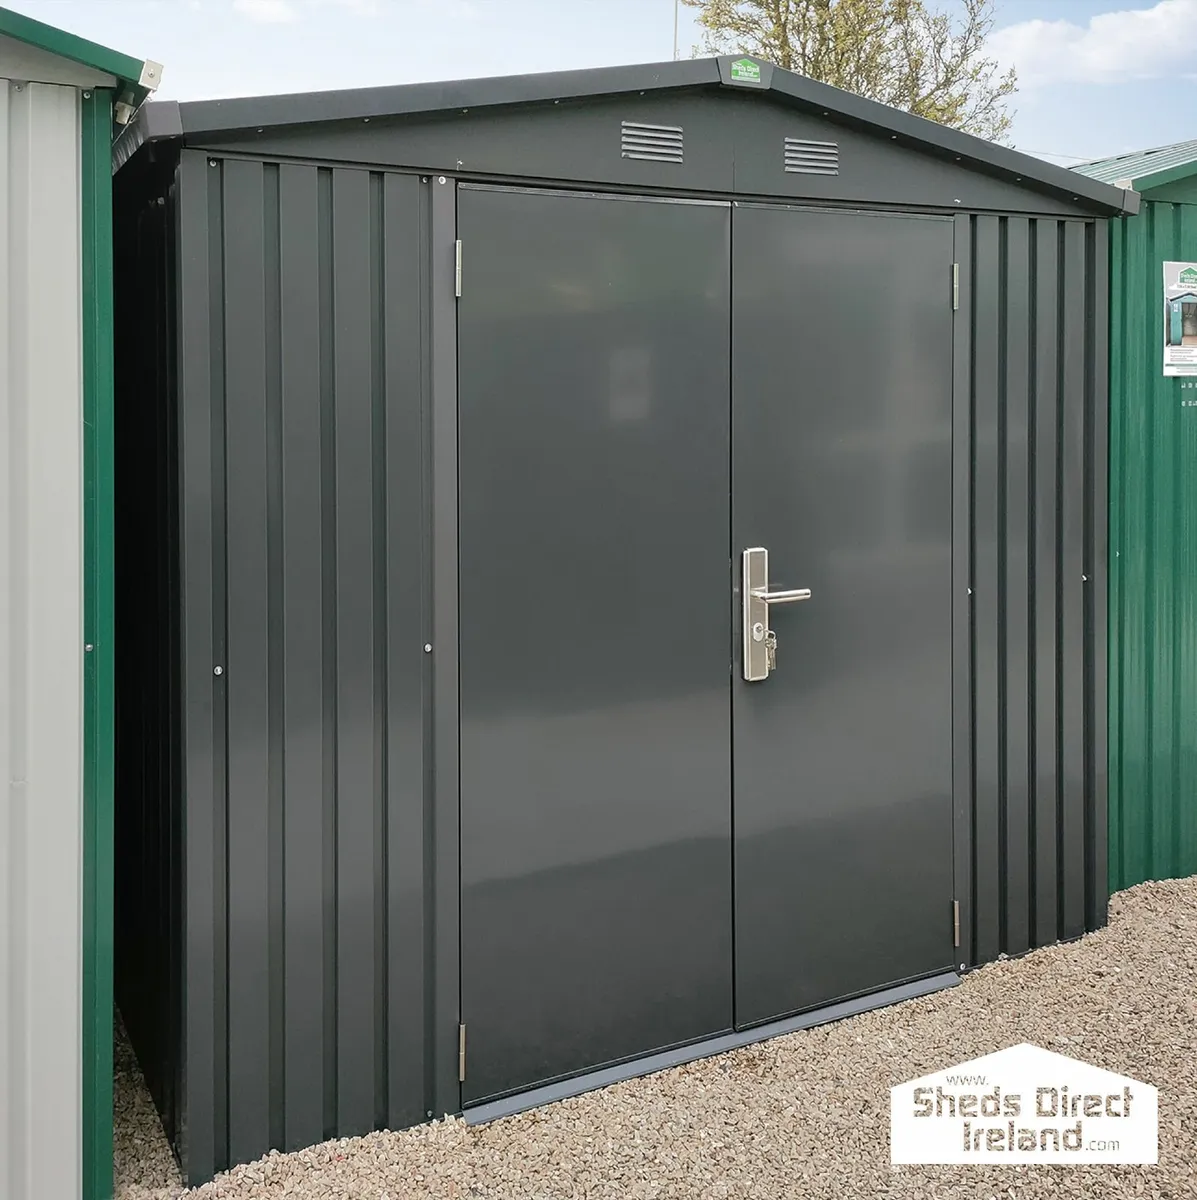 The Premium 8ft x 10ft Steel Garden Shed